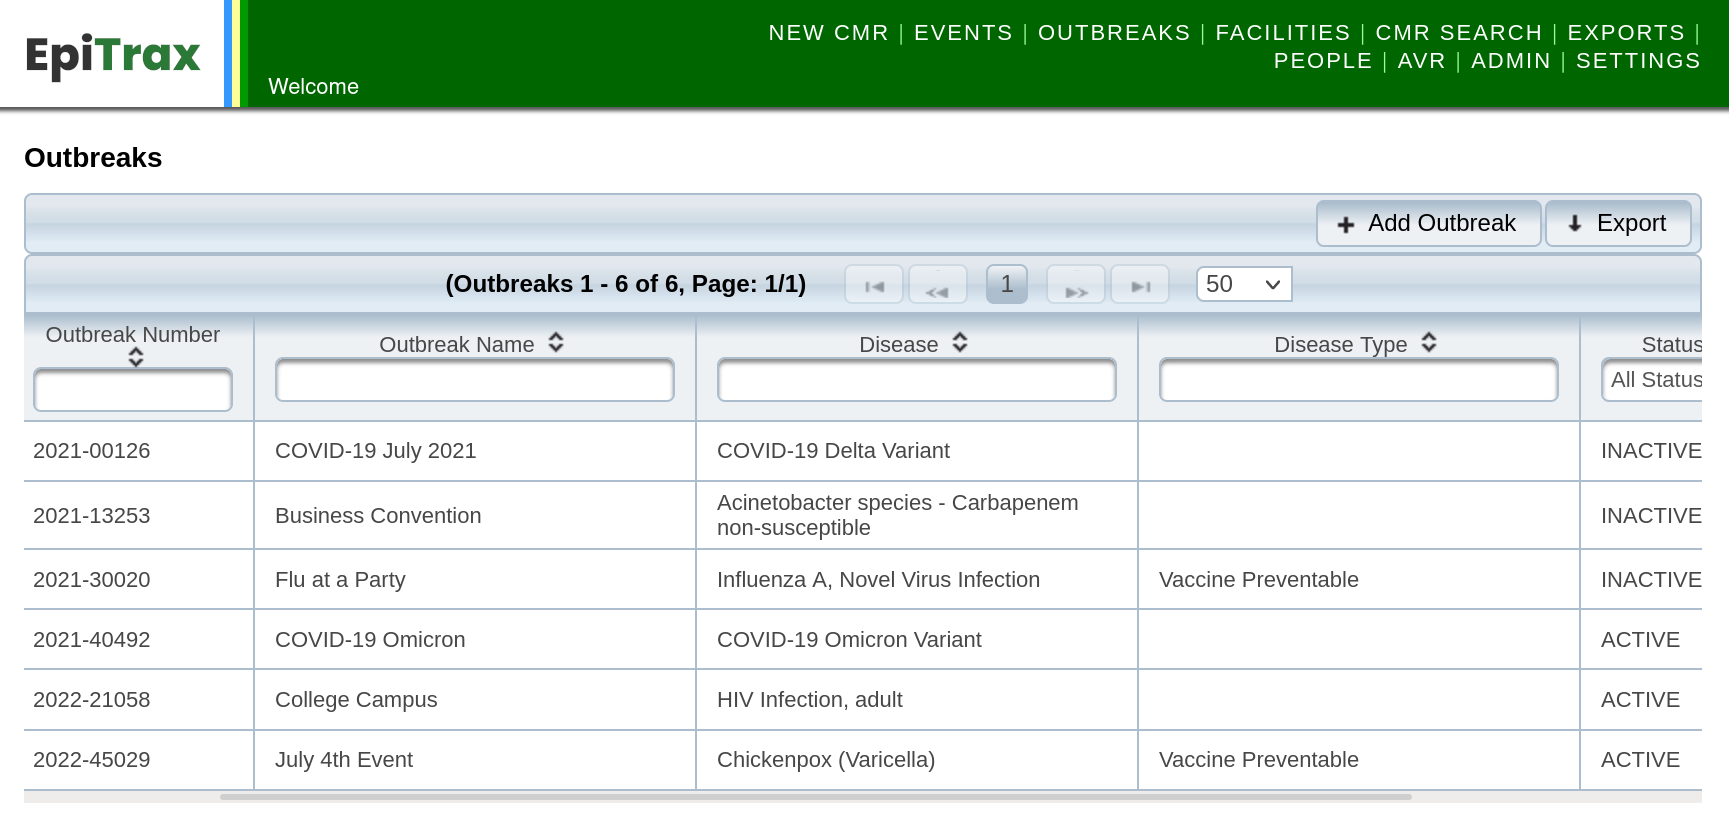 A screenshot of the EpiTrax outbreak viewer